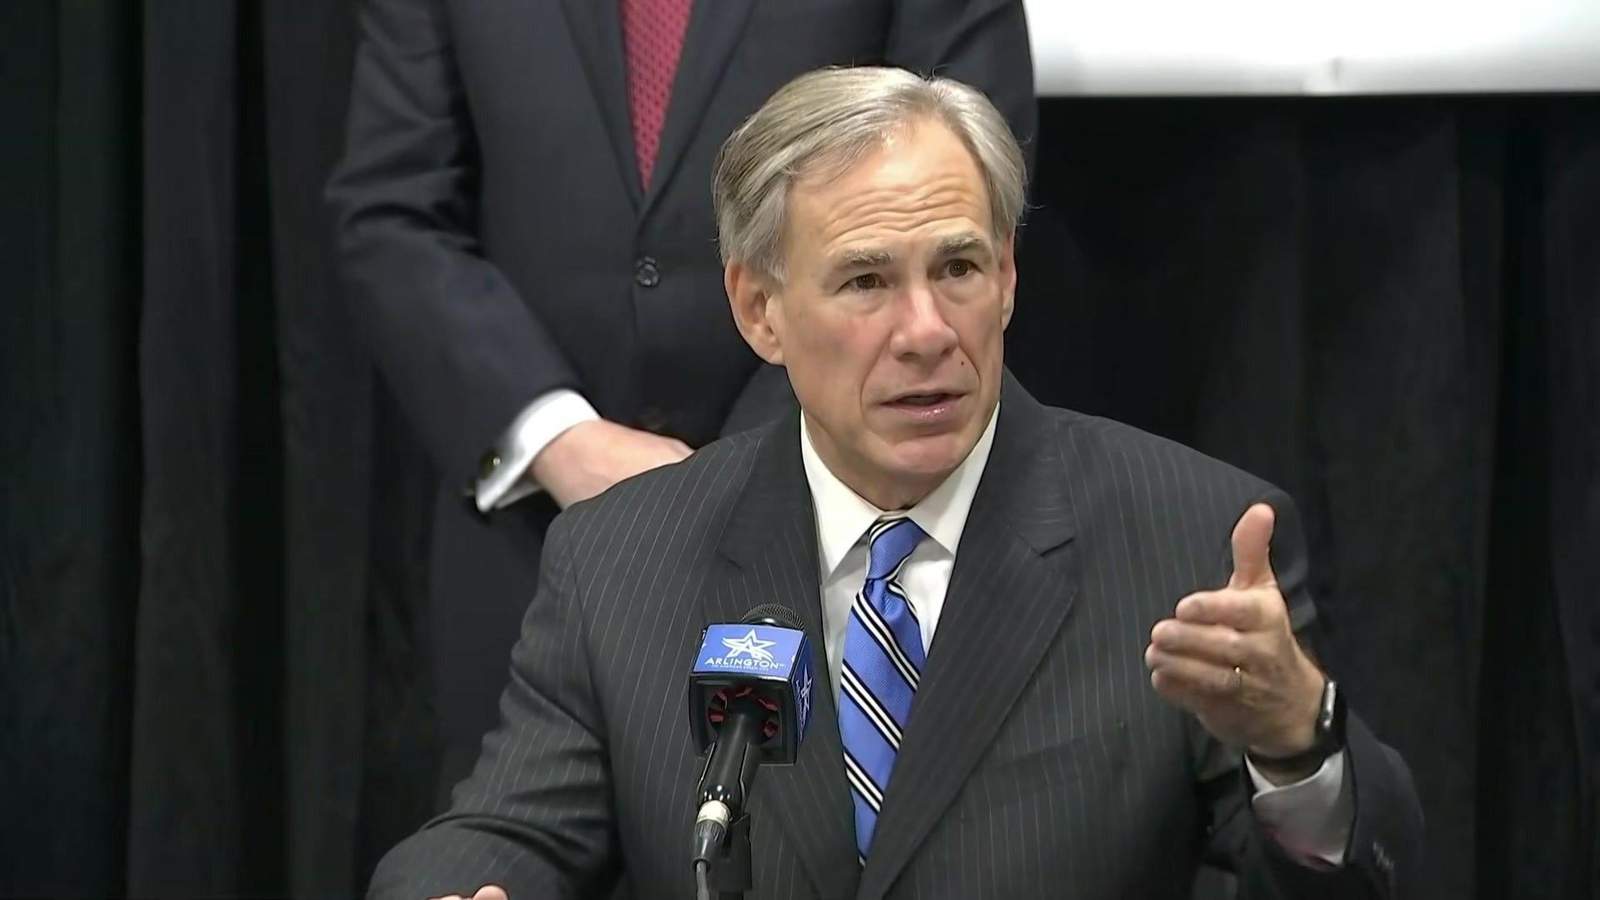 Watch: Texas Gov. Greg Abbott holds roundtable on policing priorities at 12:15 p.m.